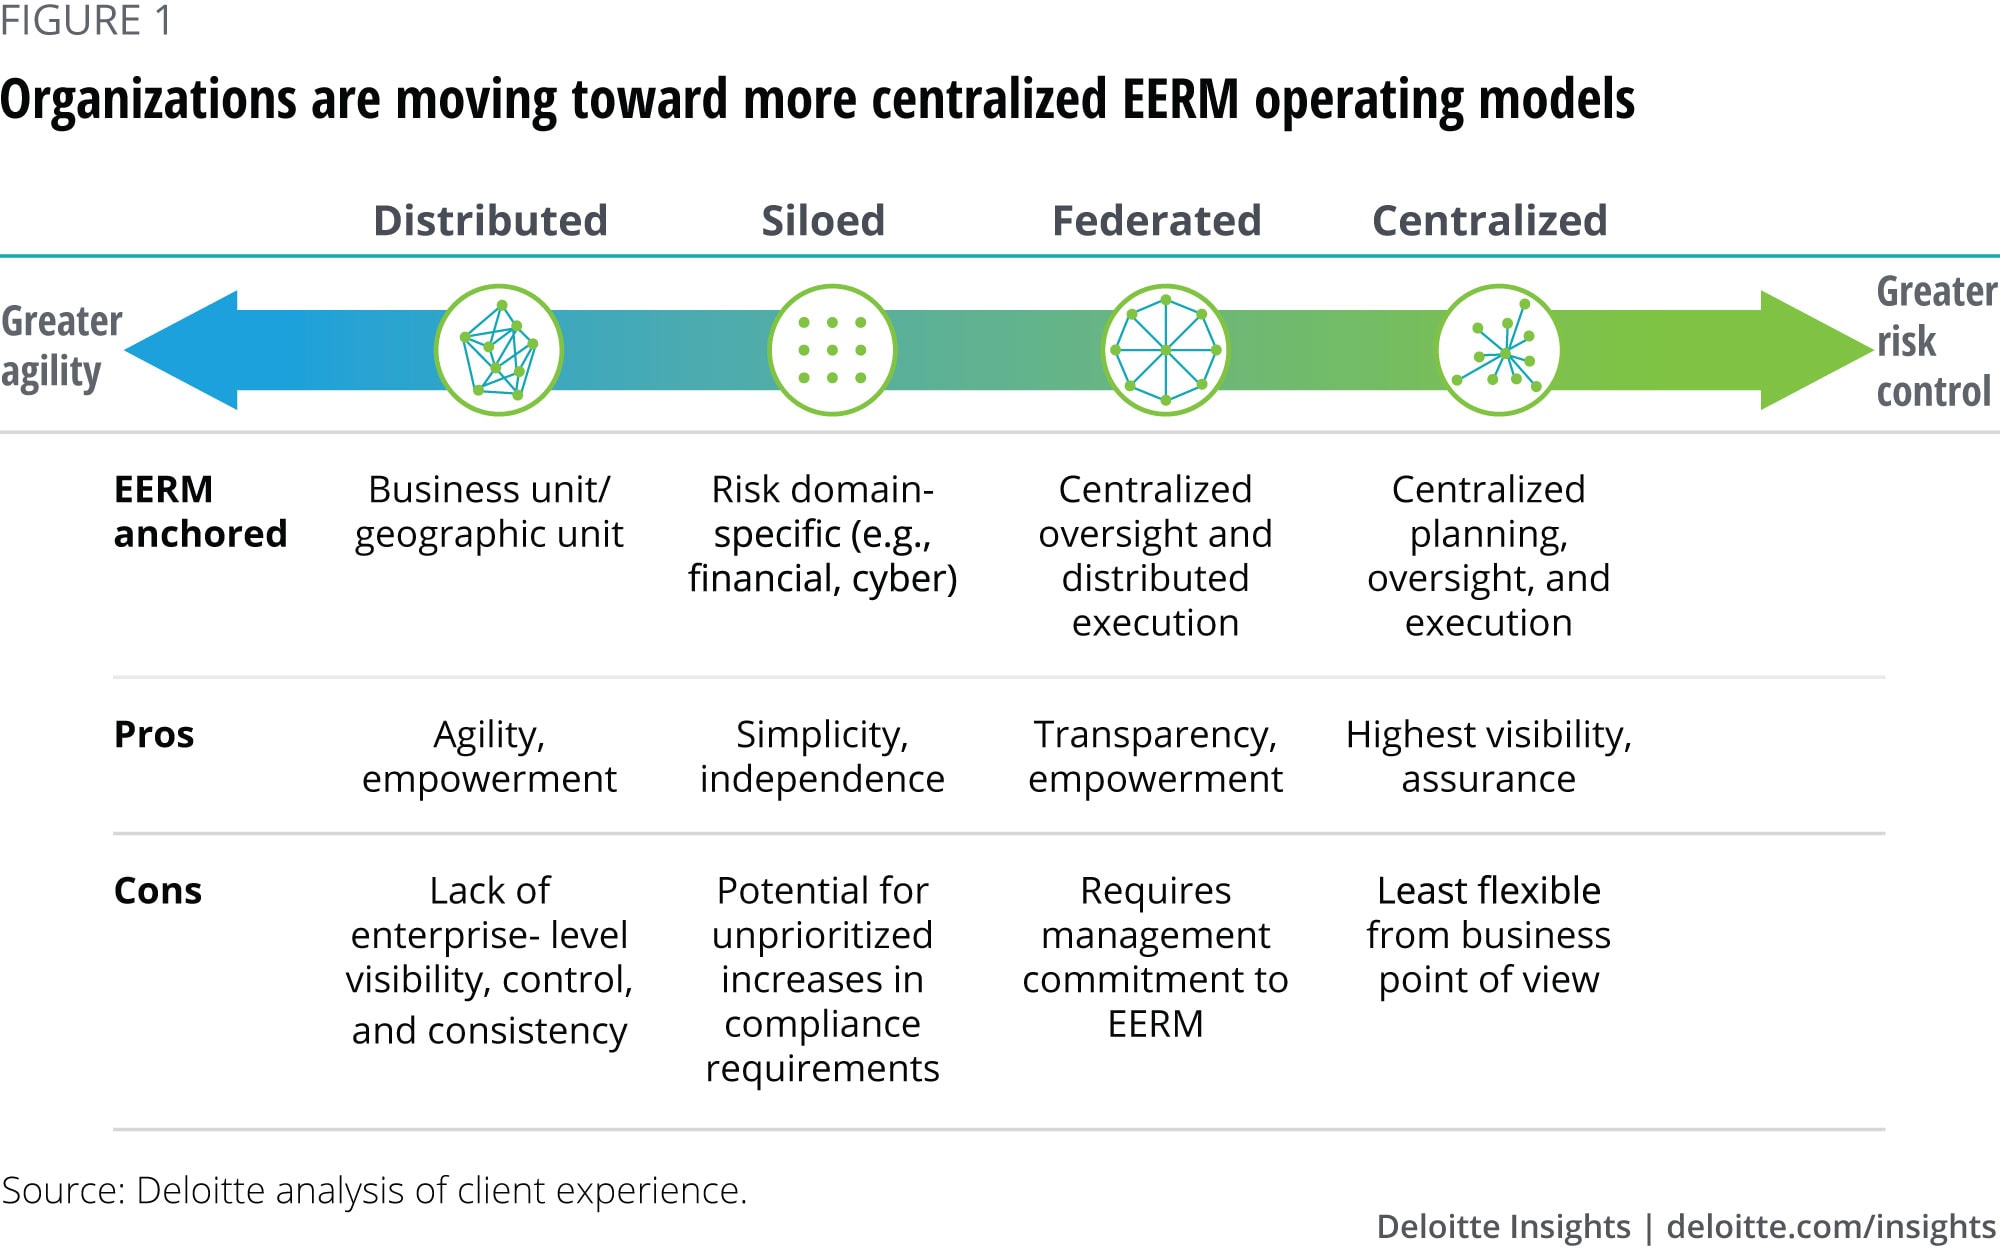 Organizations are moving toward more centralized EERM operating models